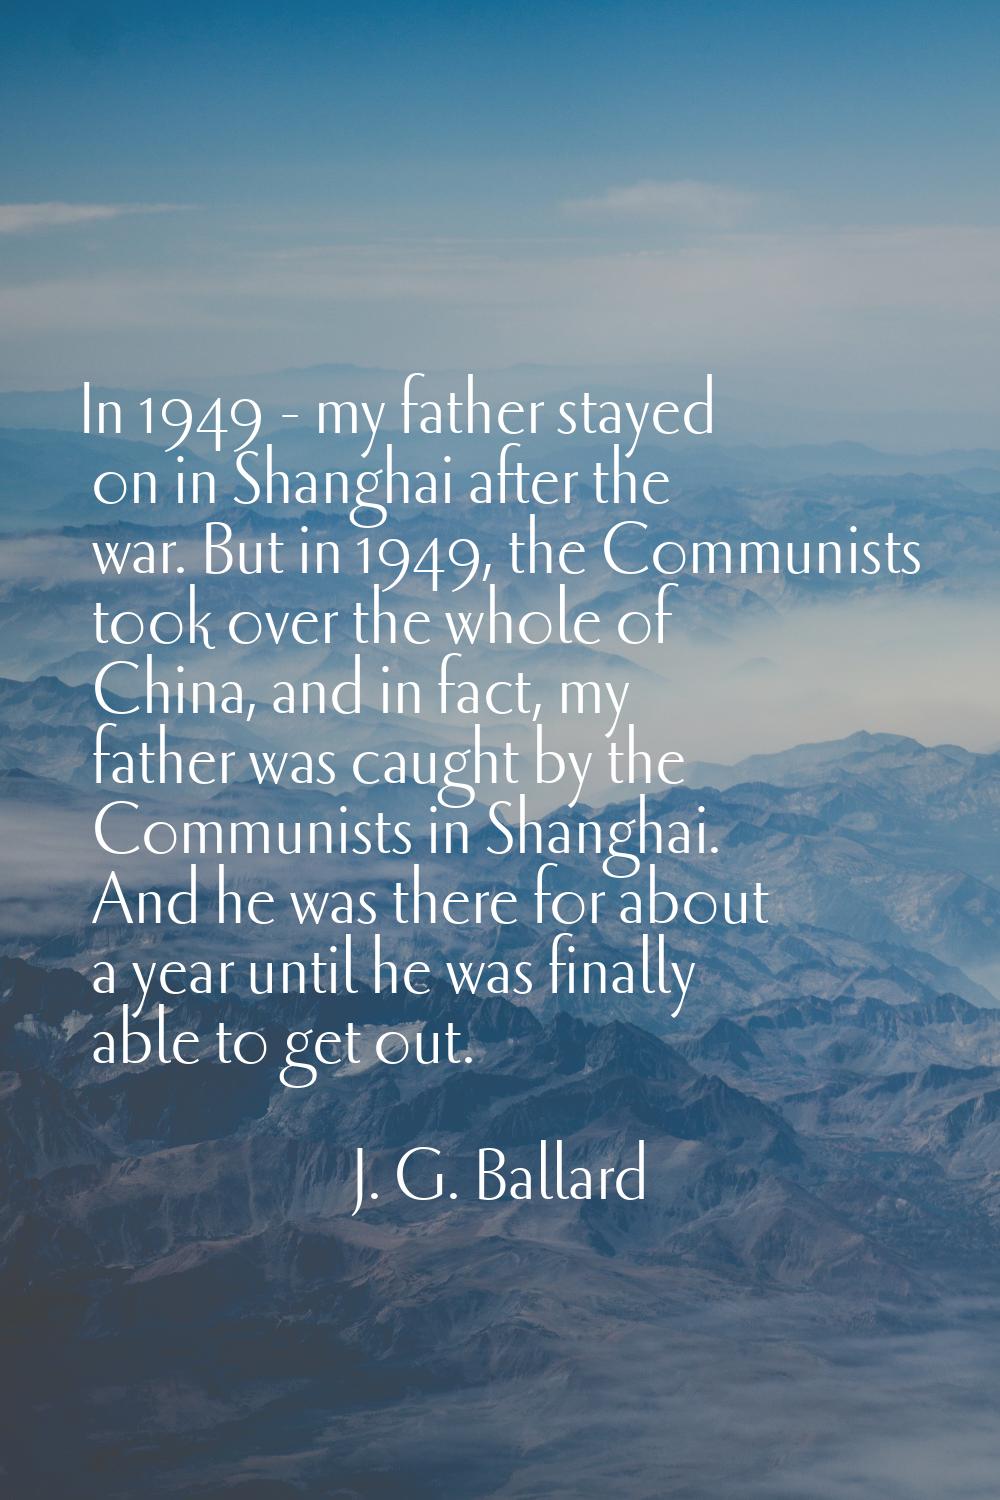 In 1949 - my father stayed on in Shanghai after the war. But in 1949, the Communists took over the 